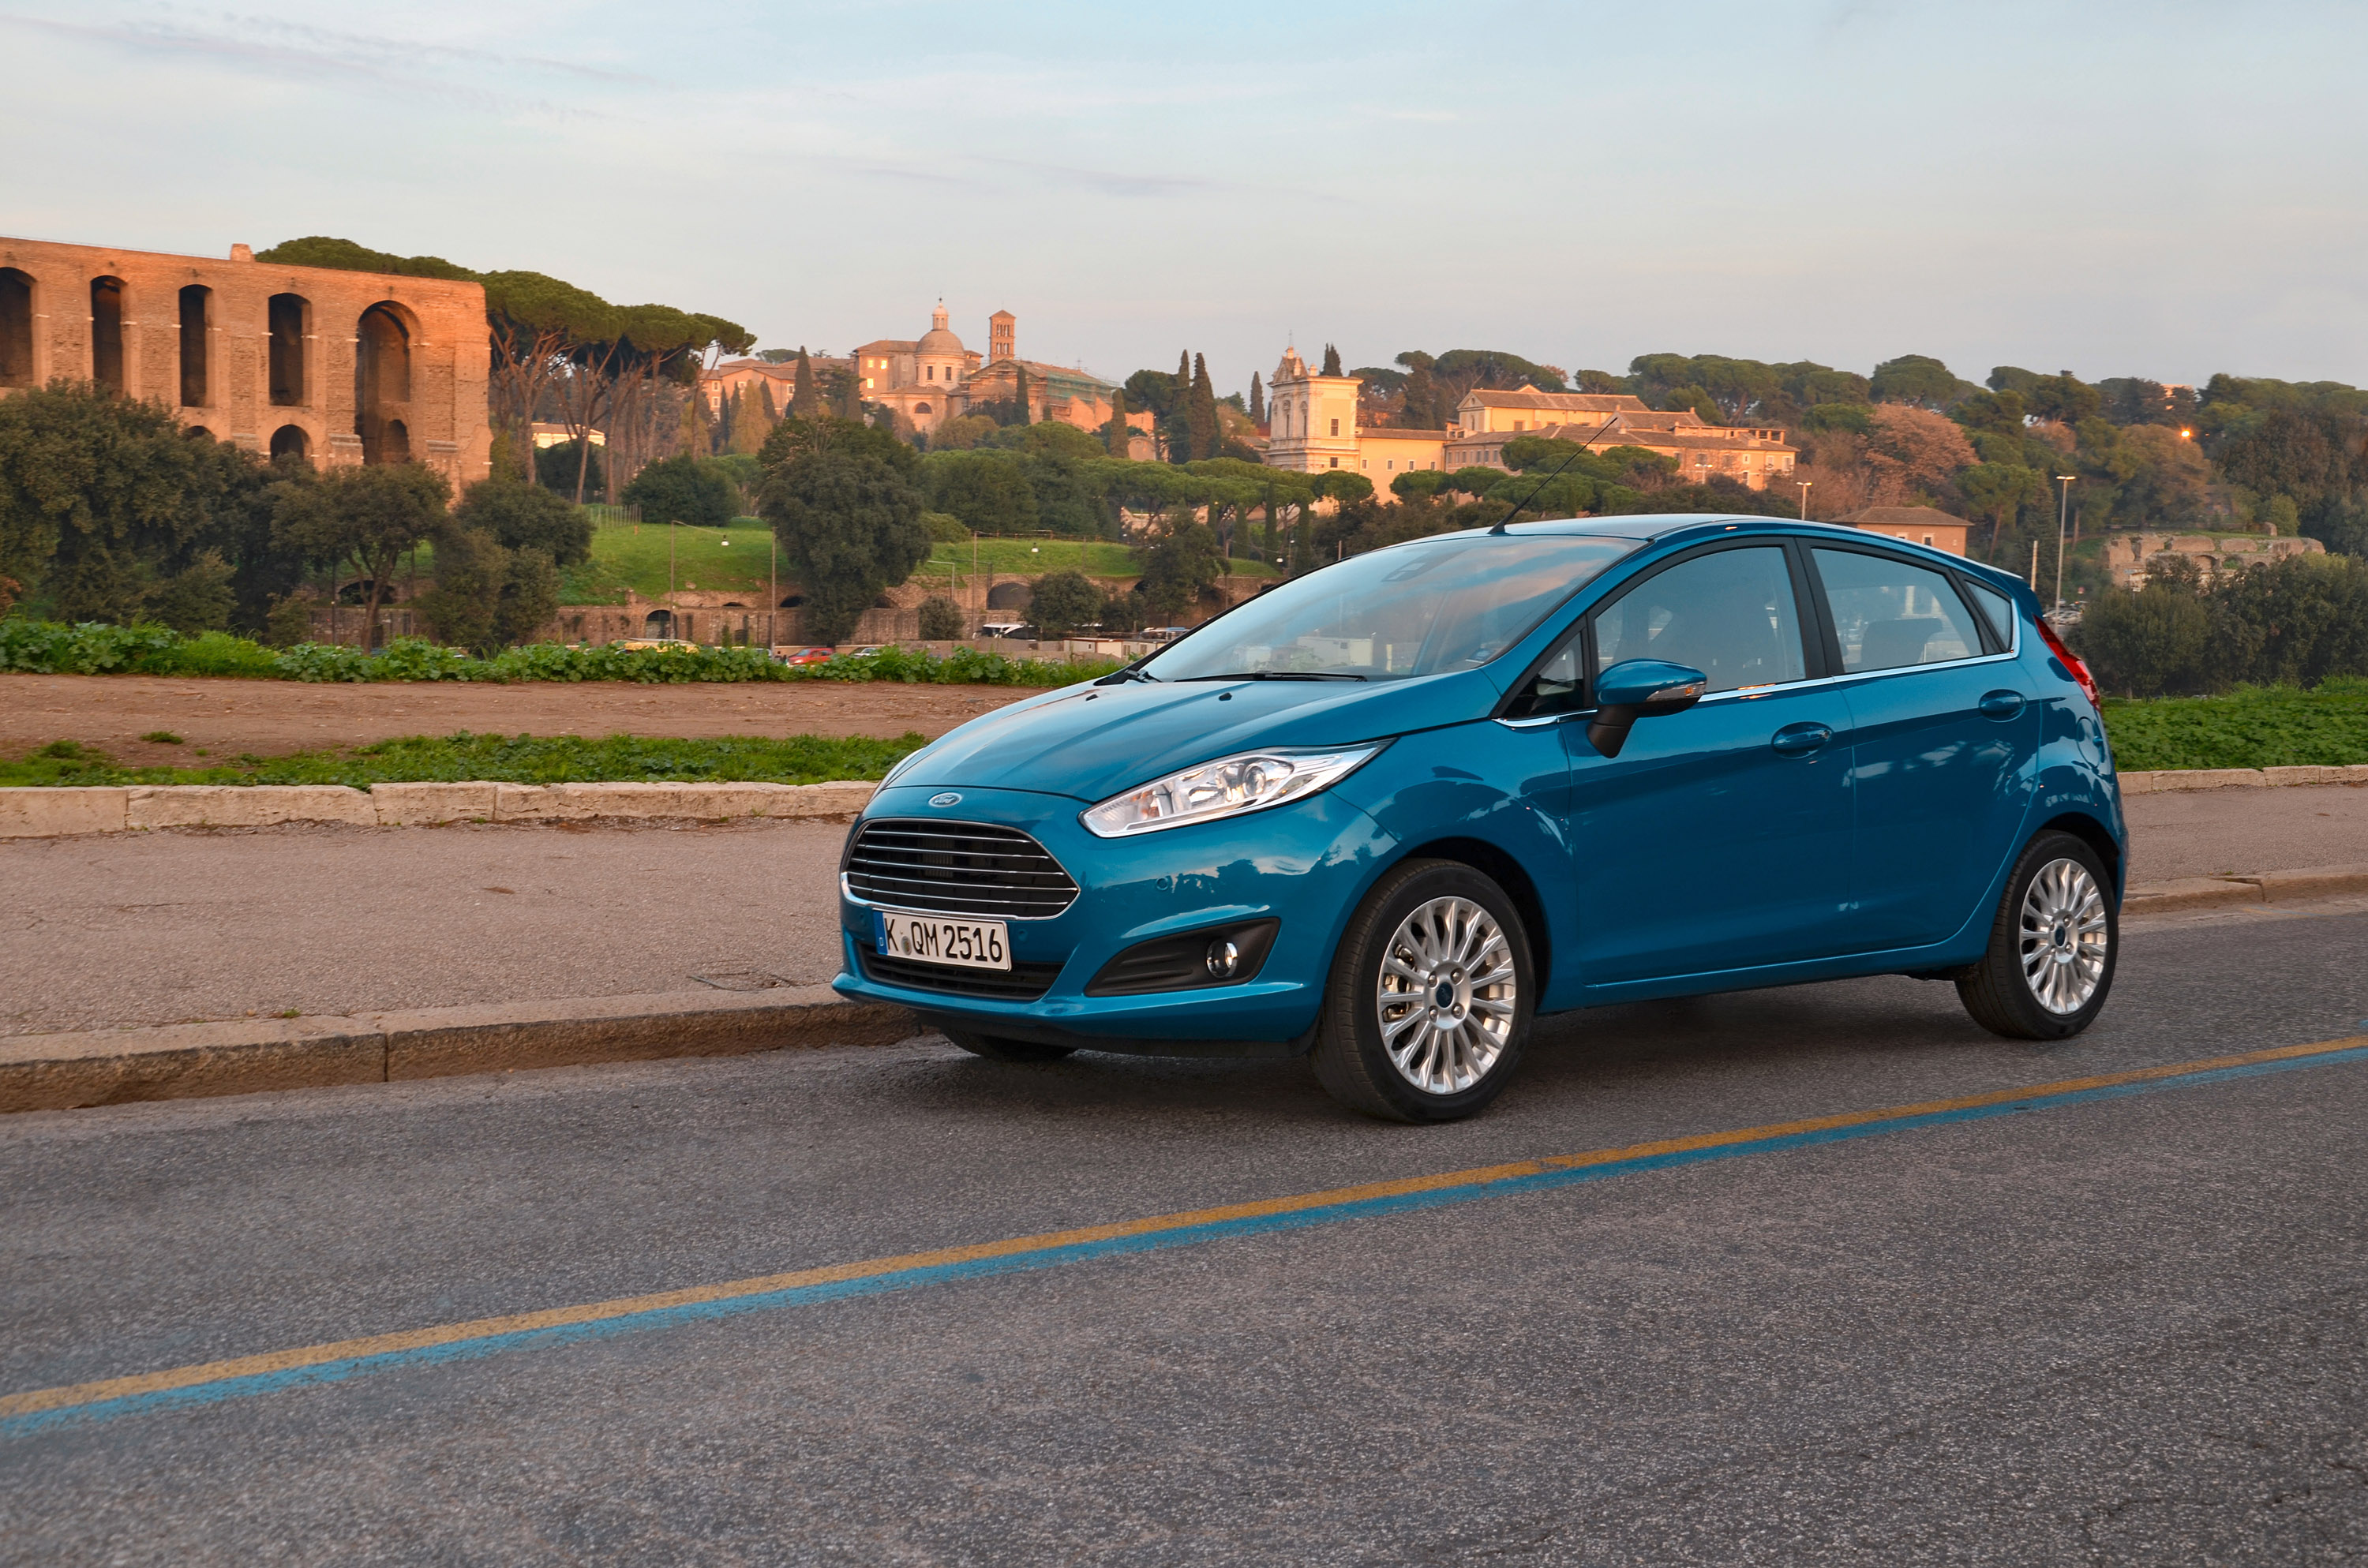 2013 Ford Fiesta - HD Pictures @ carsinvasion.com